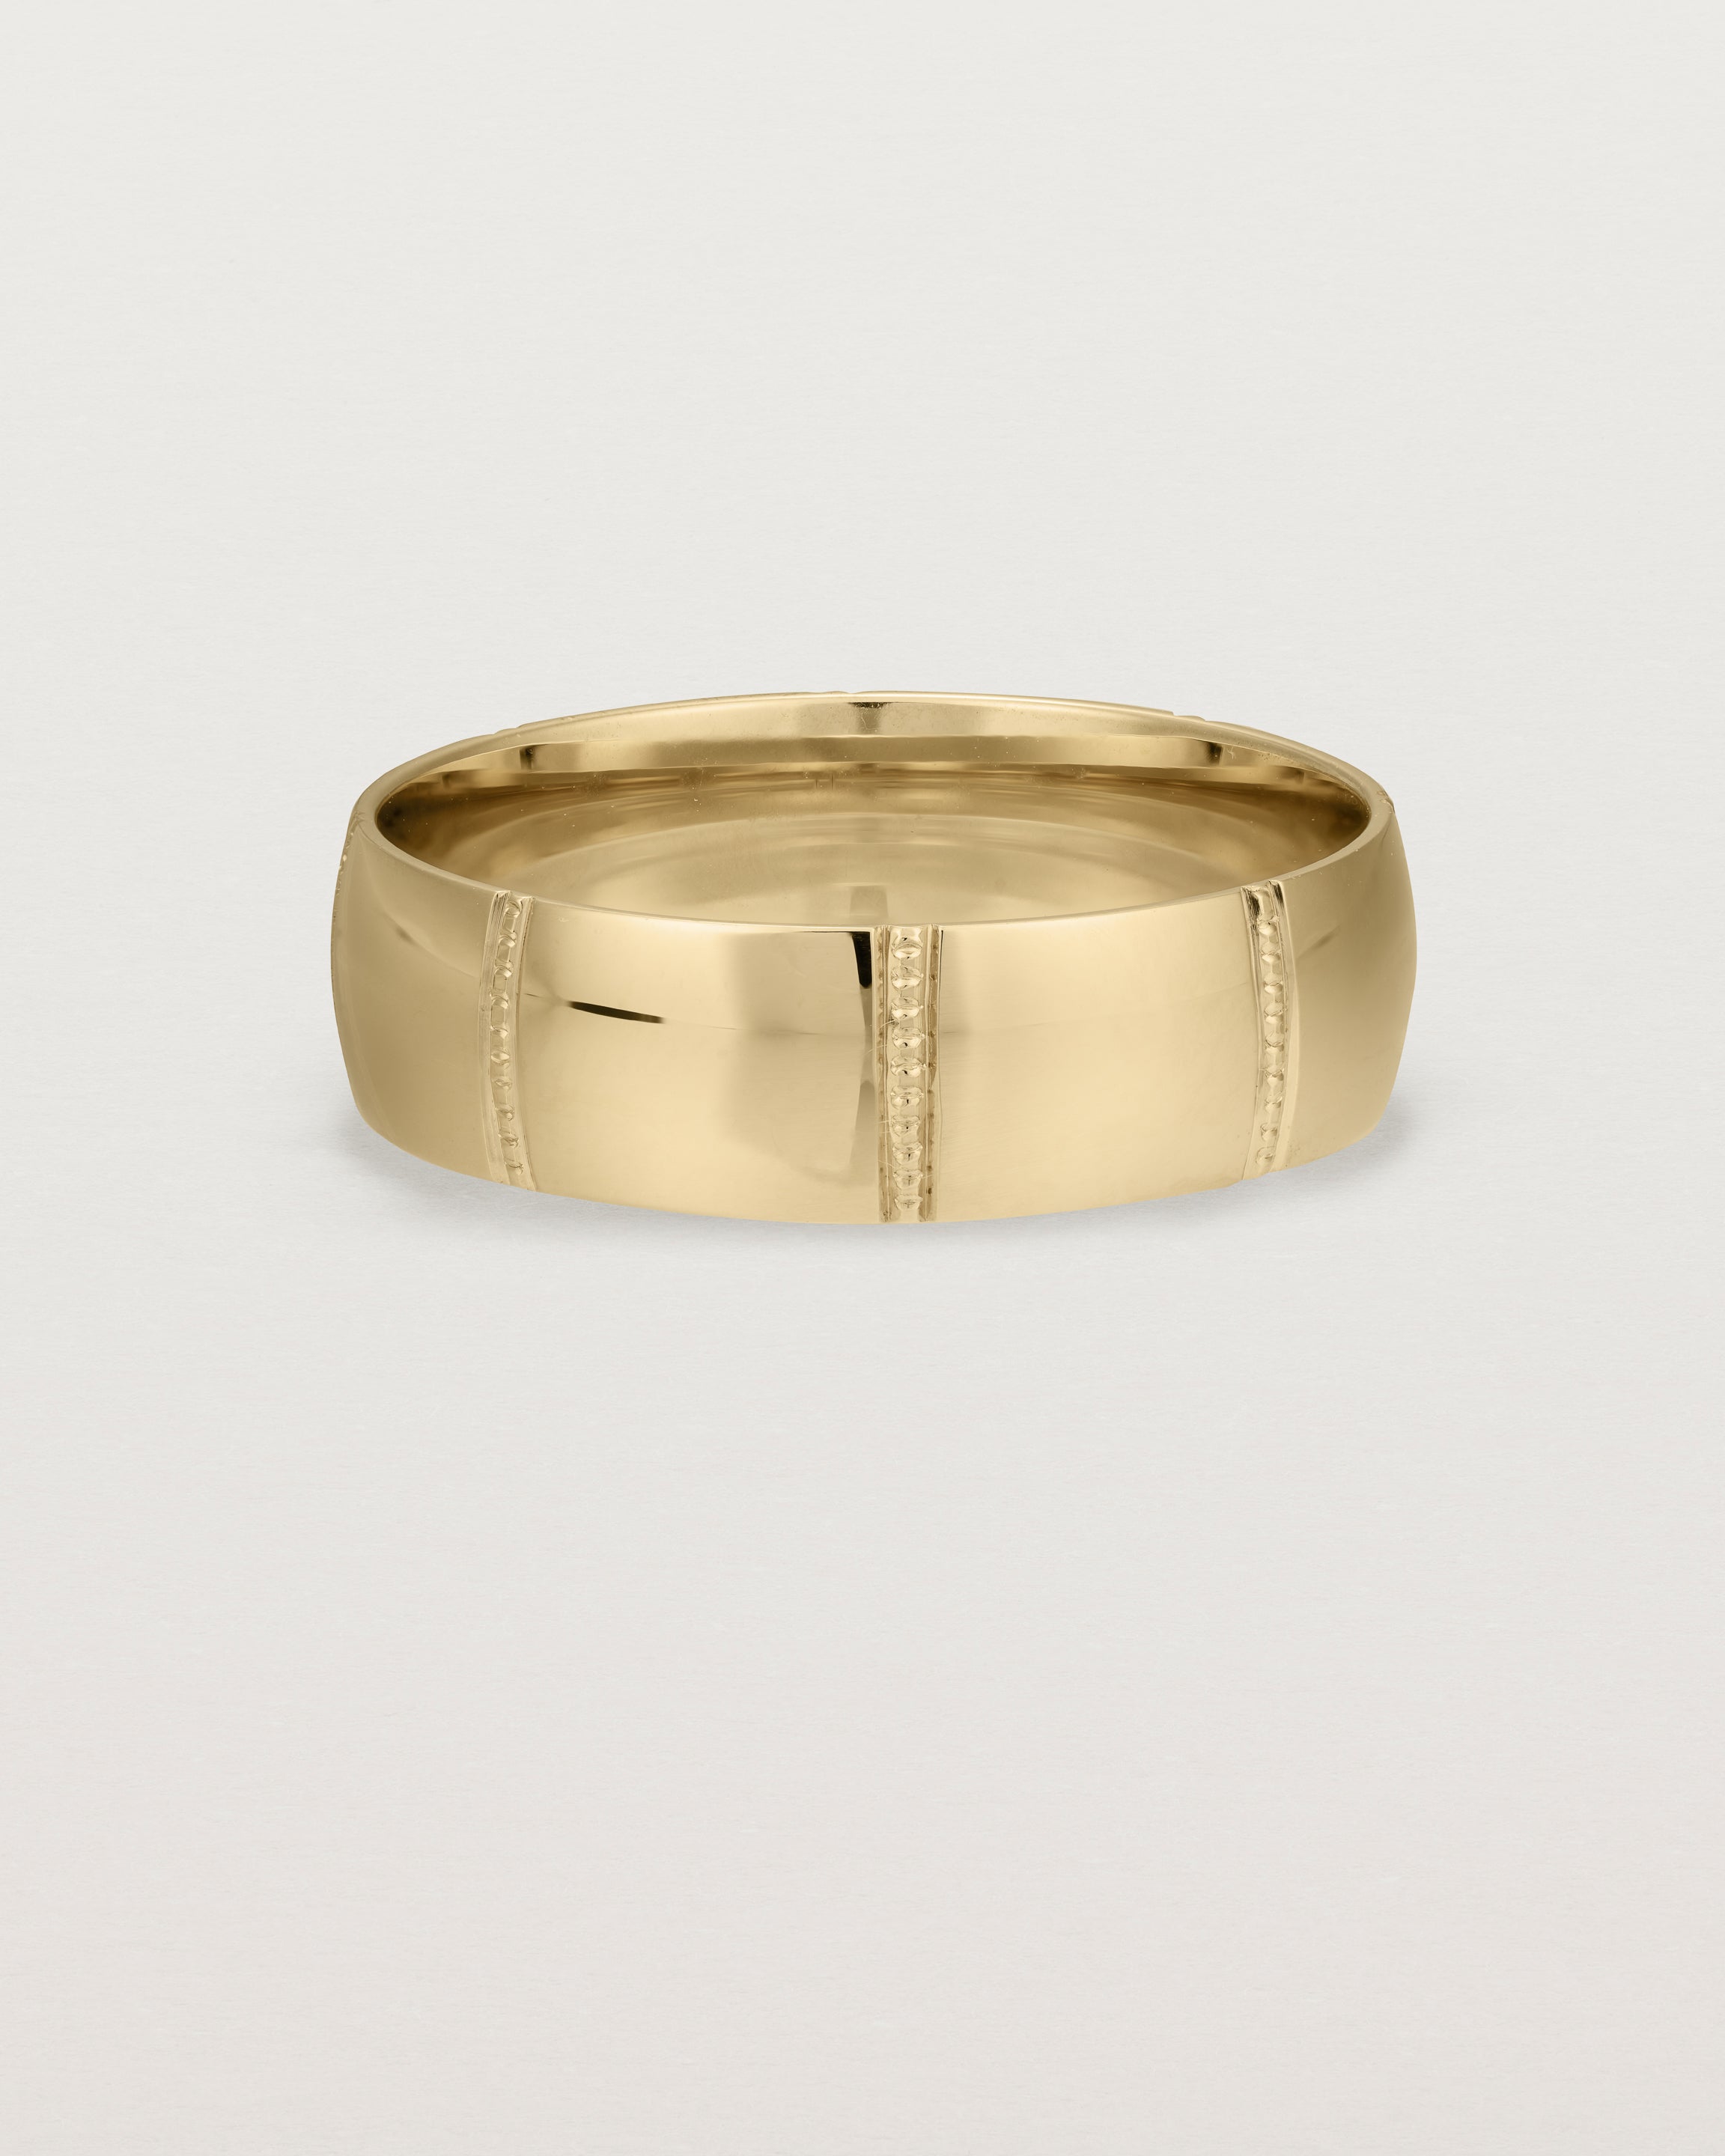 Front view of the Grain Wedding Ring | 6mm | Yellow Gold.